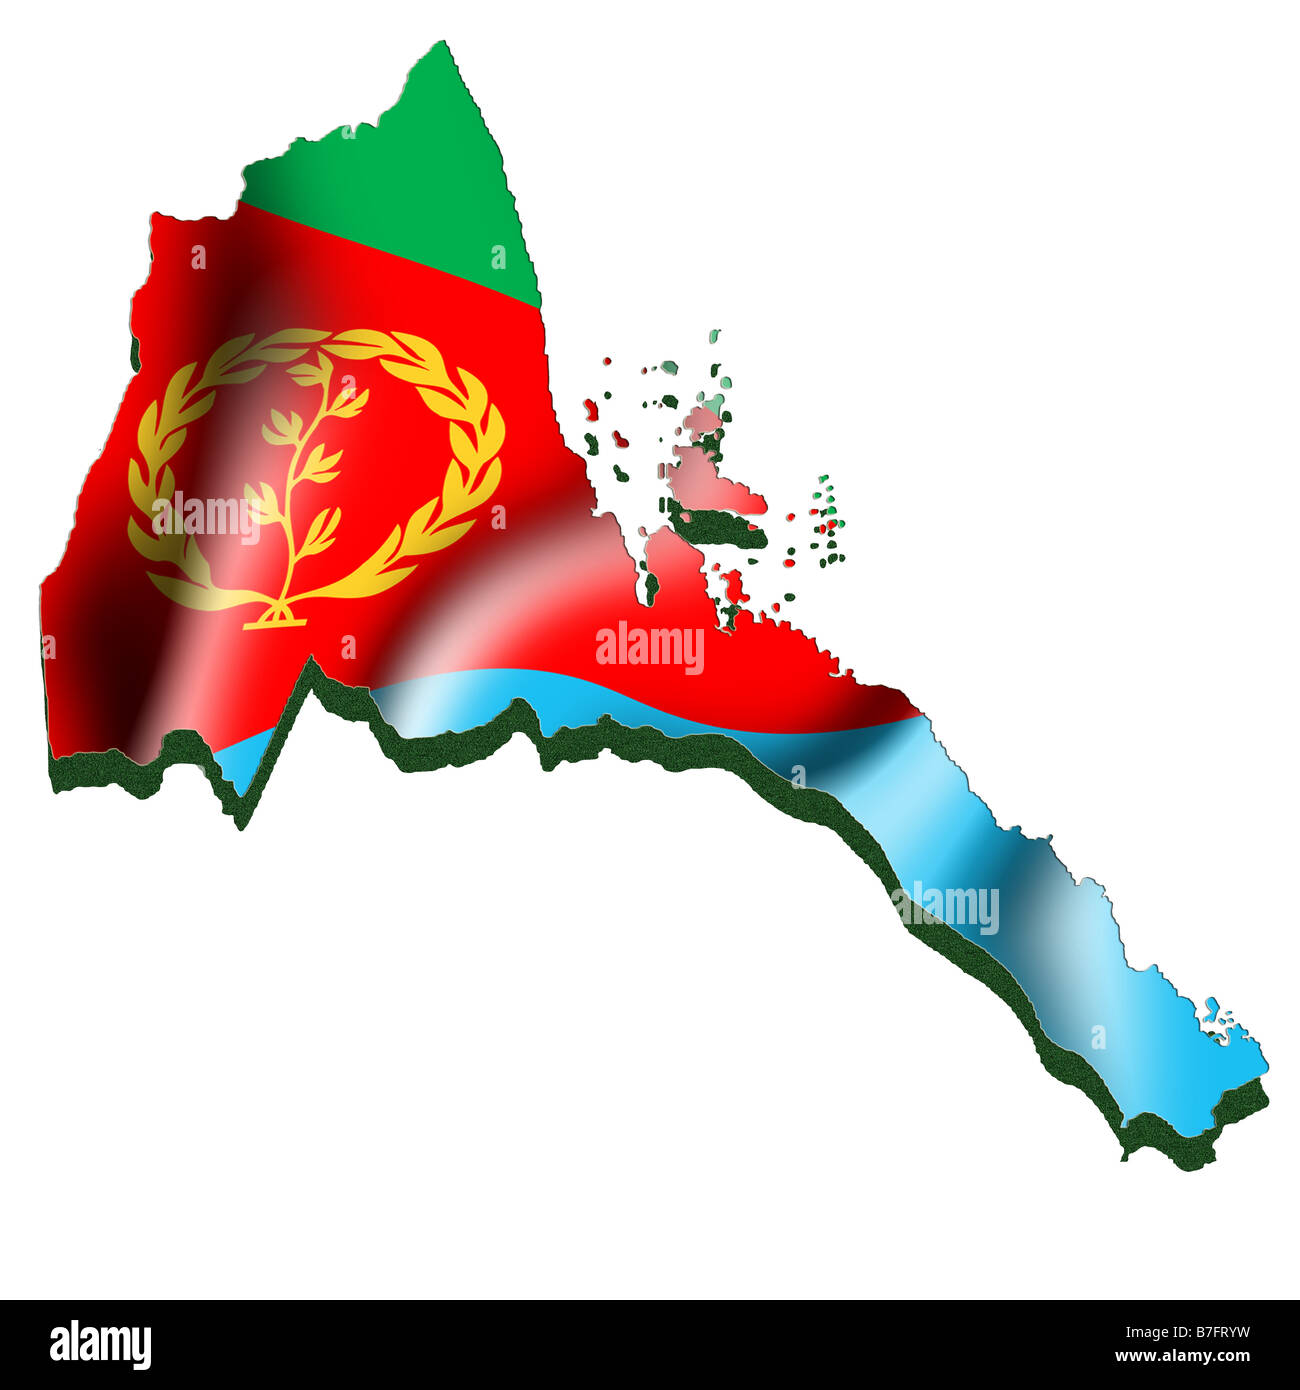 Outline map and flag of Eritrea Stock Photo